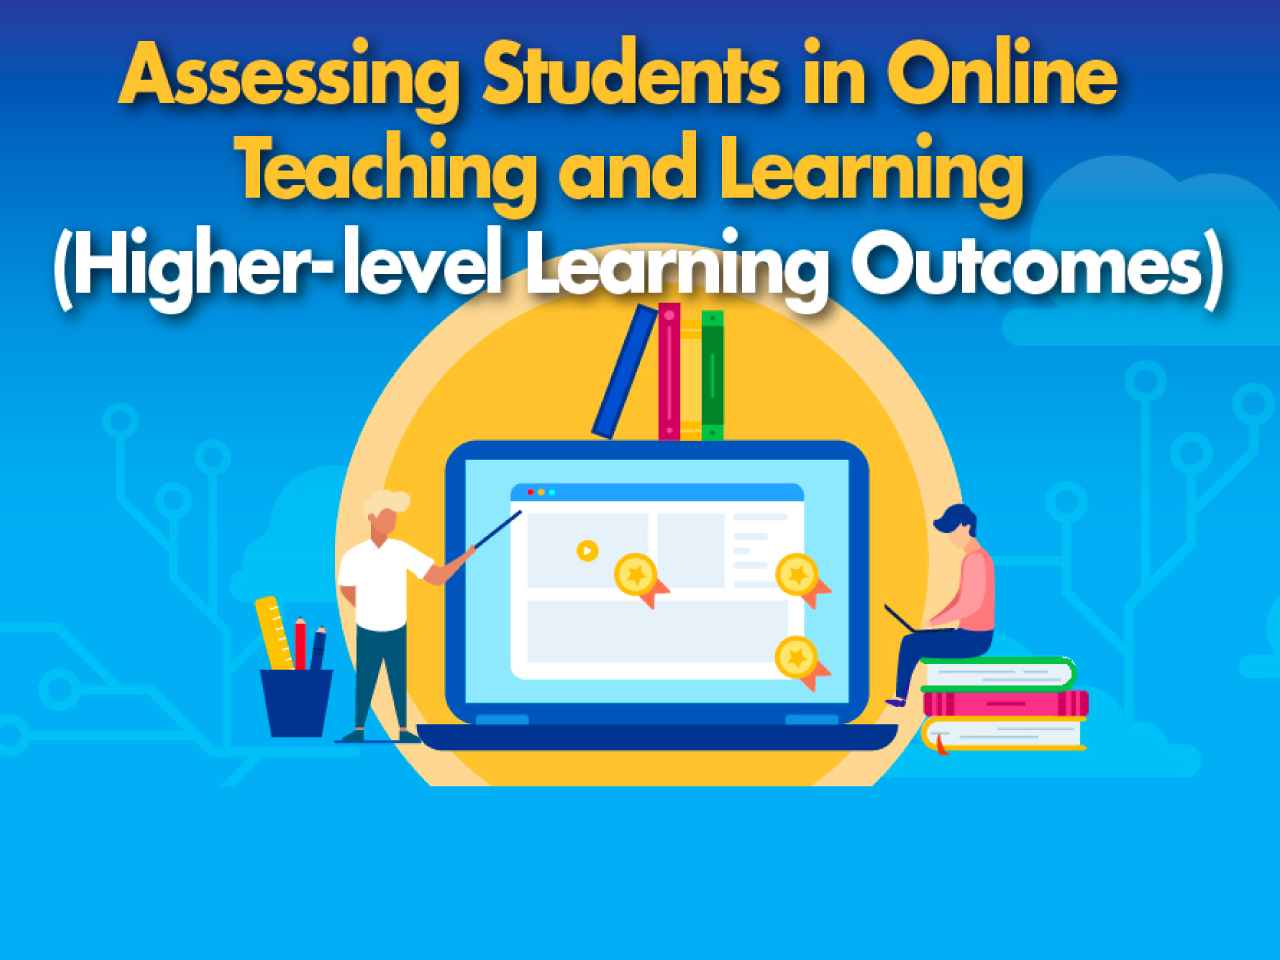 Assessing Students in Online Teaching and Learning (Higher-level Learning Outcomes) (2020-03-20)